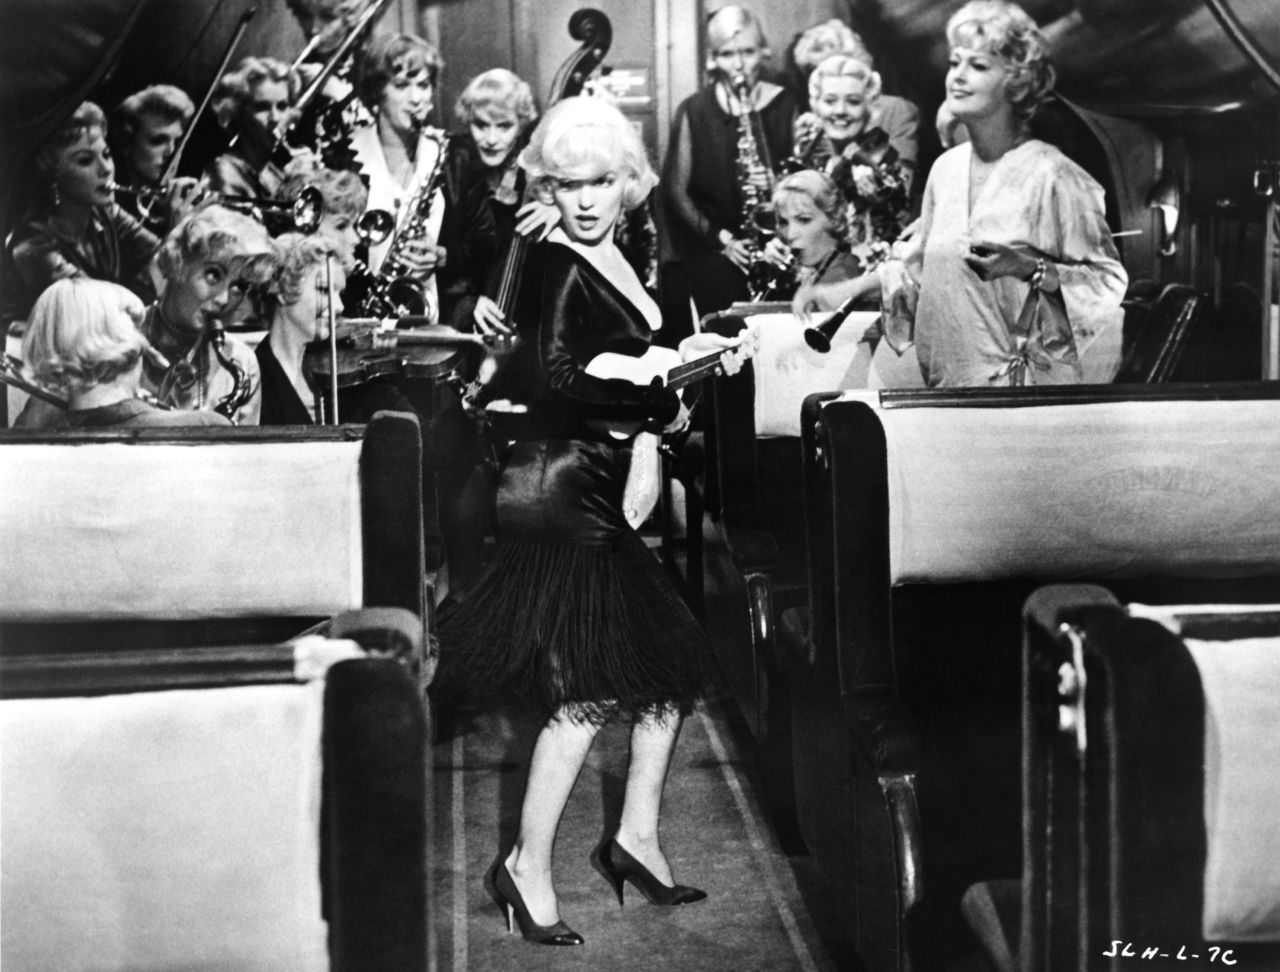 Playing Sugar Kane, Monroe sings and plays the ukulele in the movie "Some Like It Hot." The film is one of her greatest performances. "When I knew I had the final shots, there was a moment of 'never again,'" said film director Billy Wilder. "Well, all I can tell you is if Marilyn was around today, I would be on my knees, 'Please, let's do it again.'"